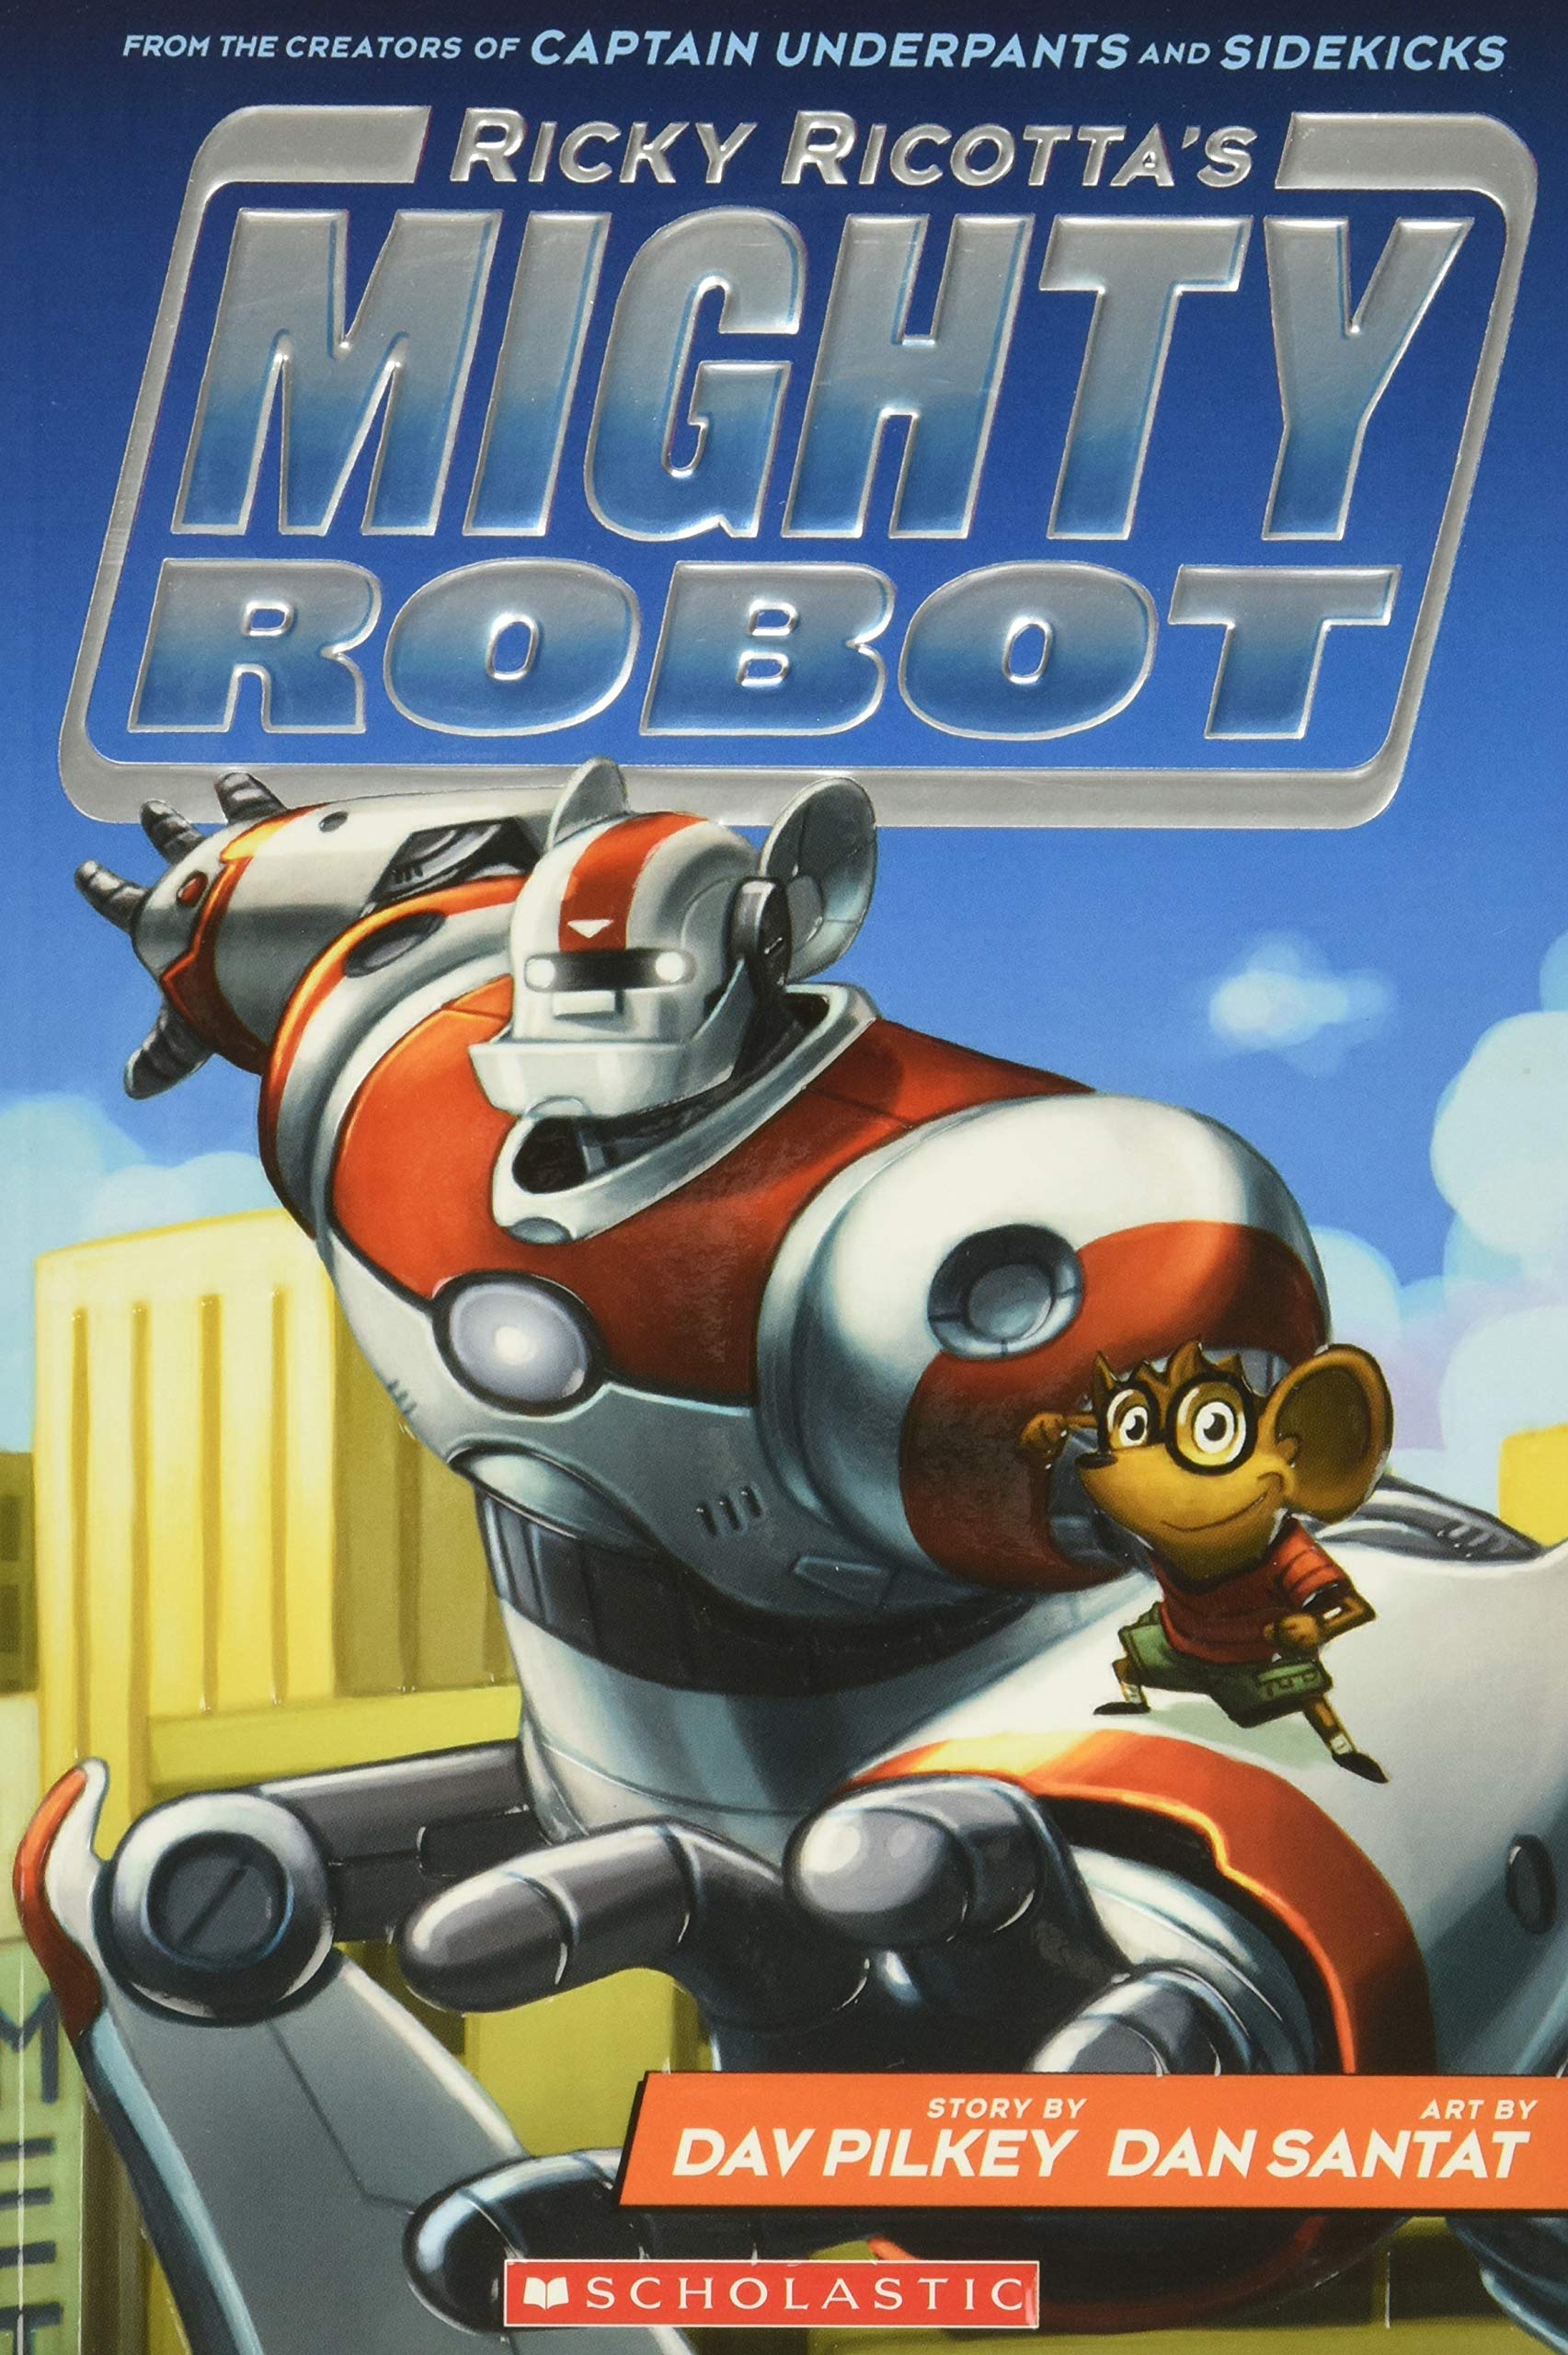 Robot and Mouse pose on cover of book